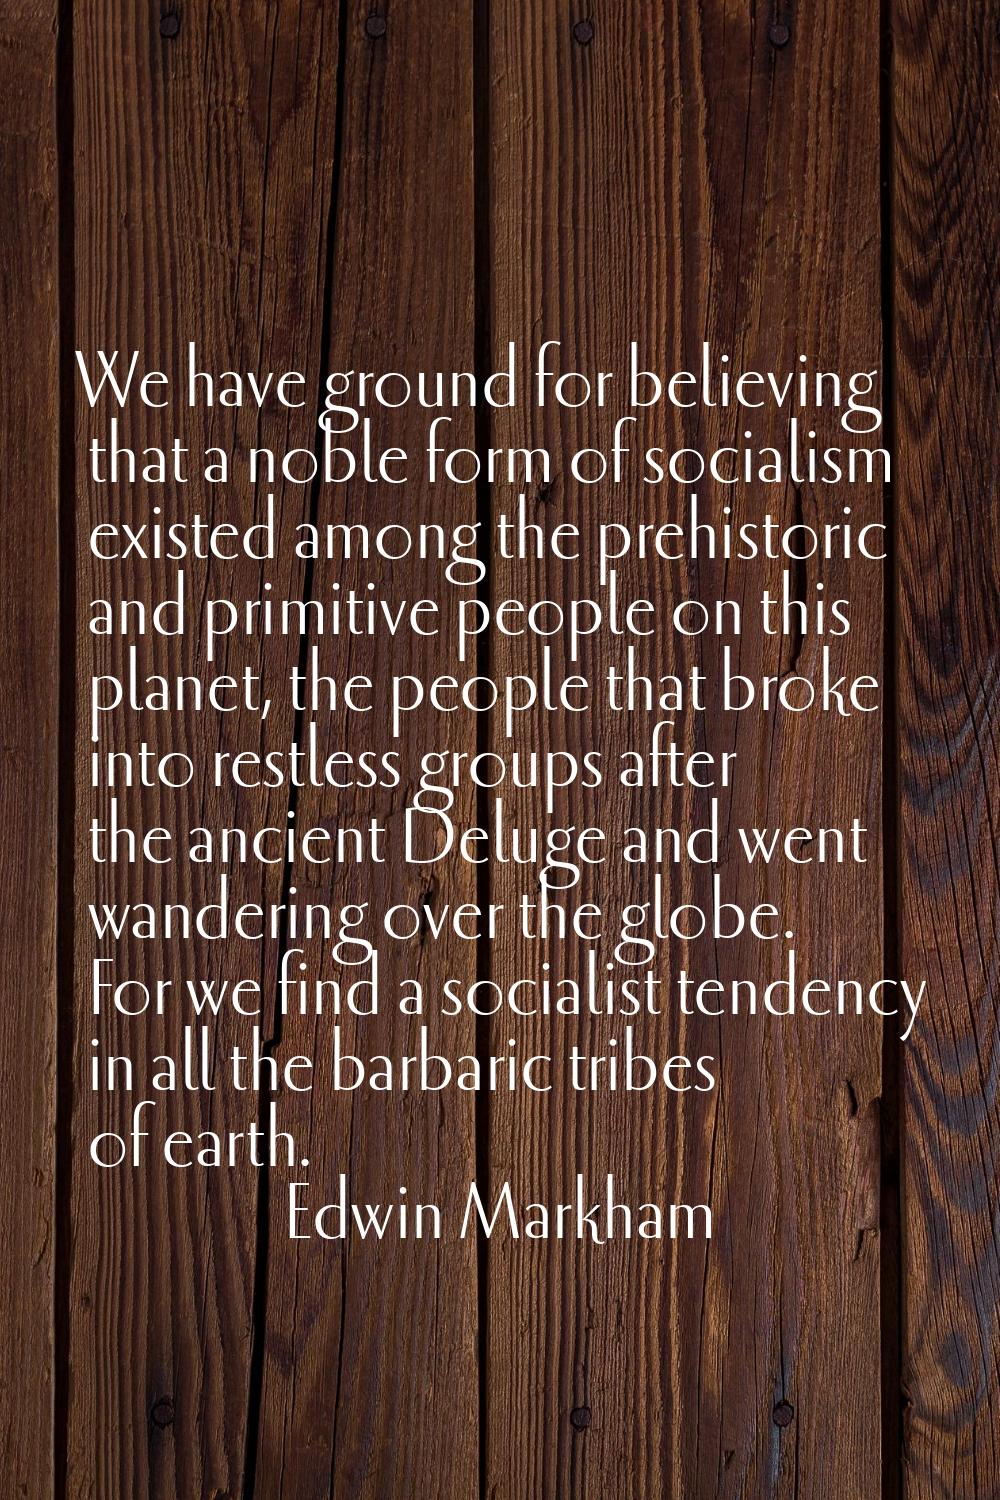 We have ground for believing that a noble form of socialism existed among the prehistoric and primi